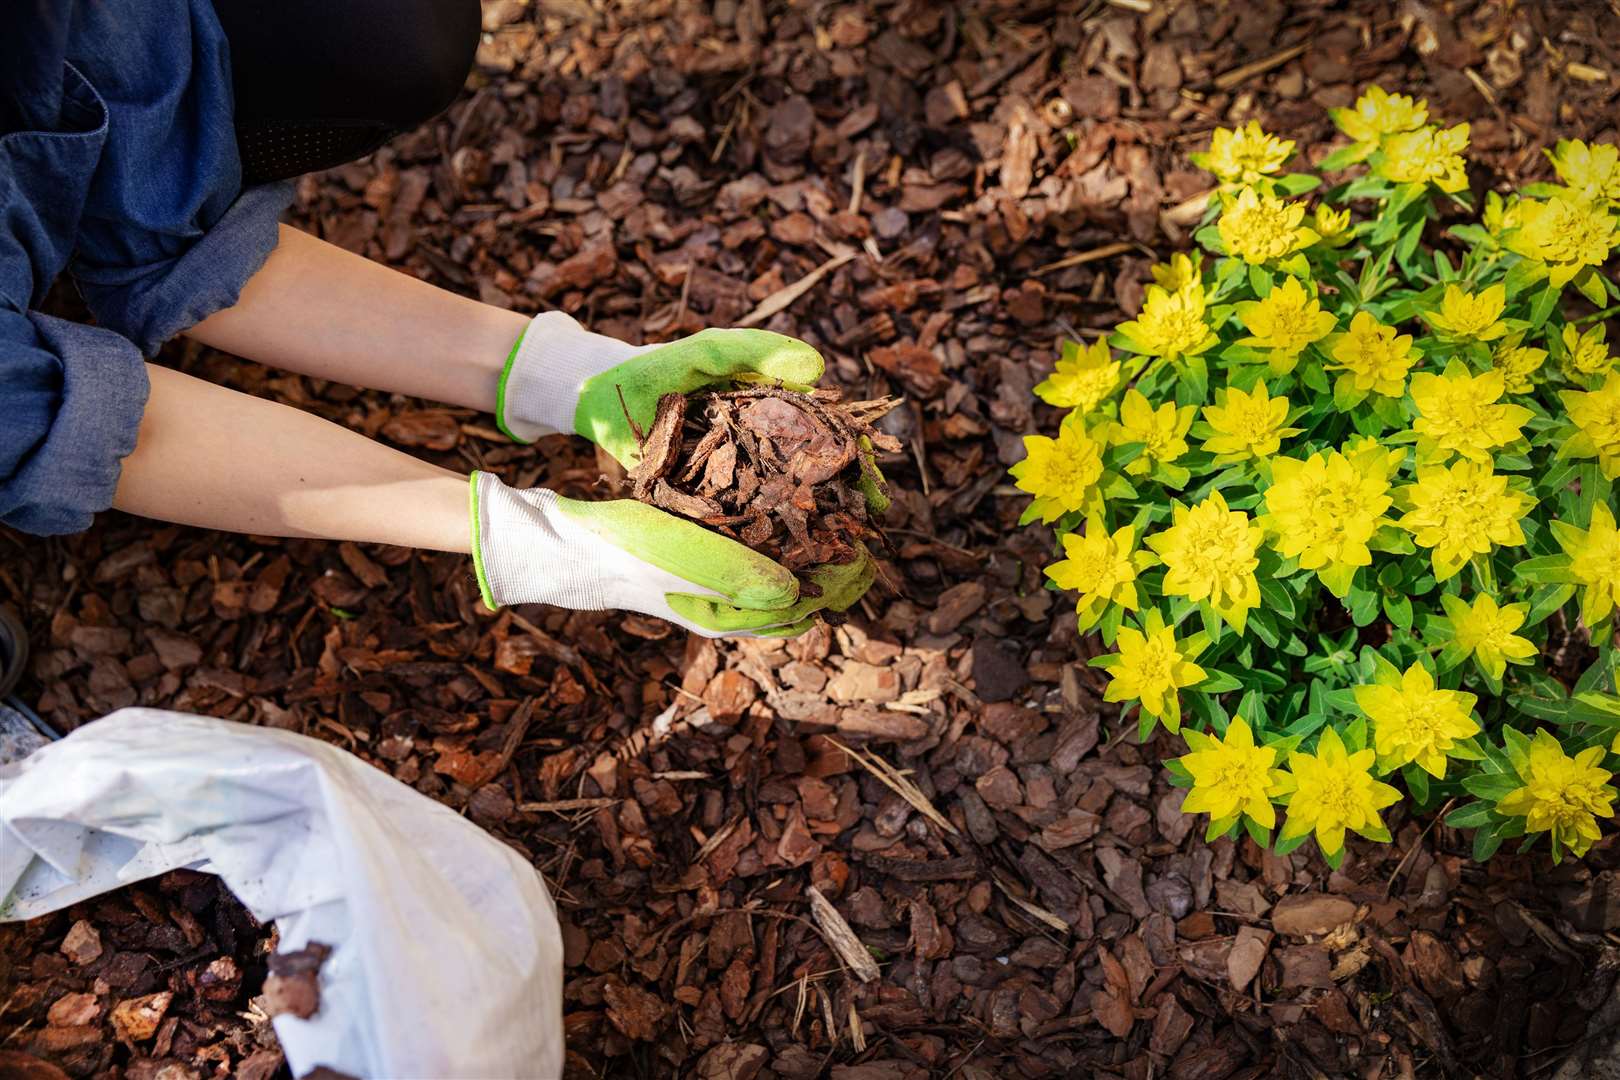 Spreading mulch on a border can reduce the amount of weeding you'll need to do later in the year. Picture: iStock/PA